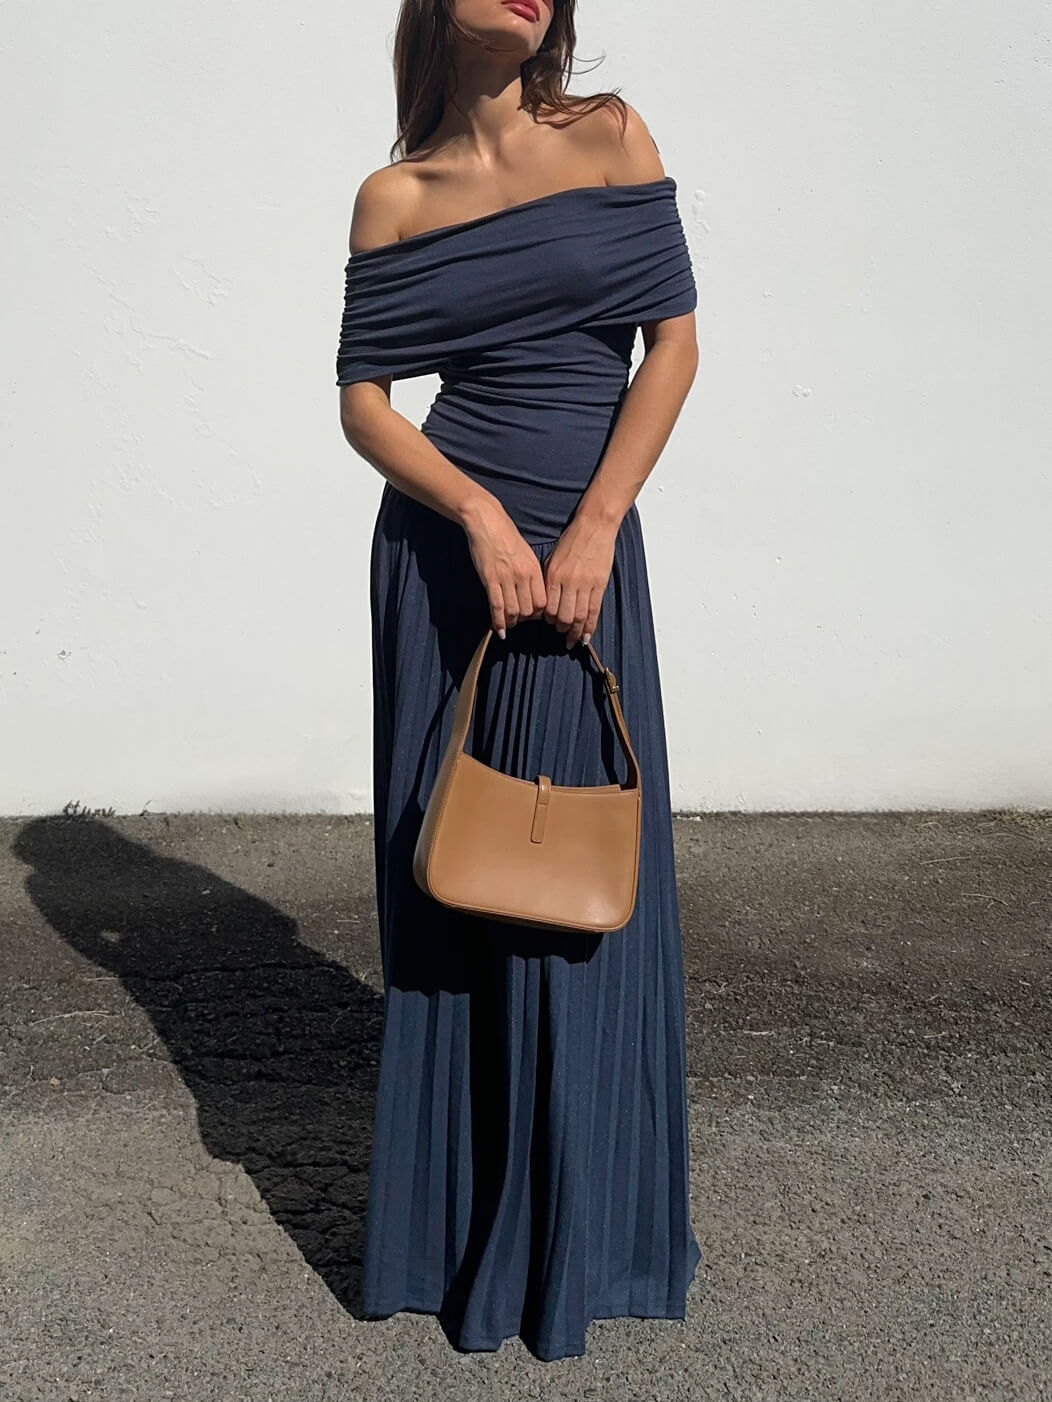 Elegant Sexy Off-the-shoulder Pleated Long Dress